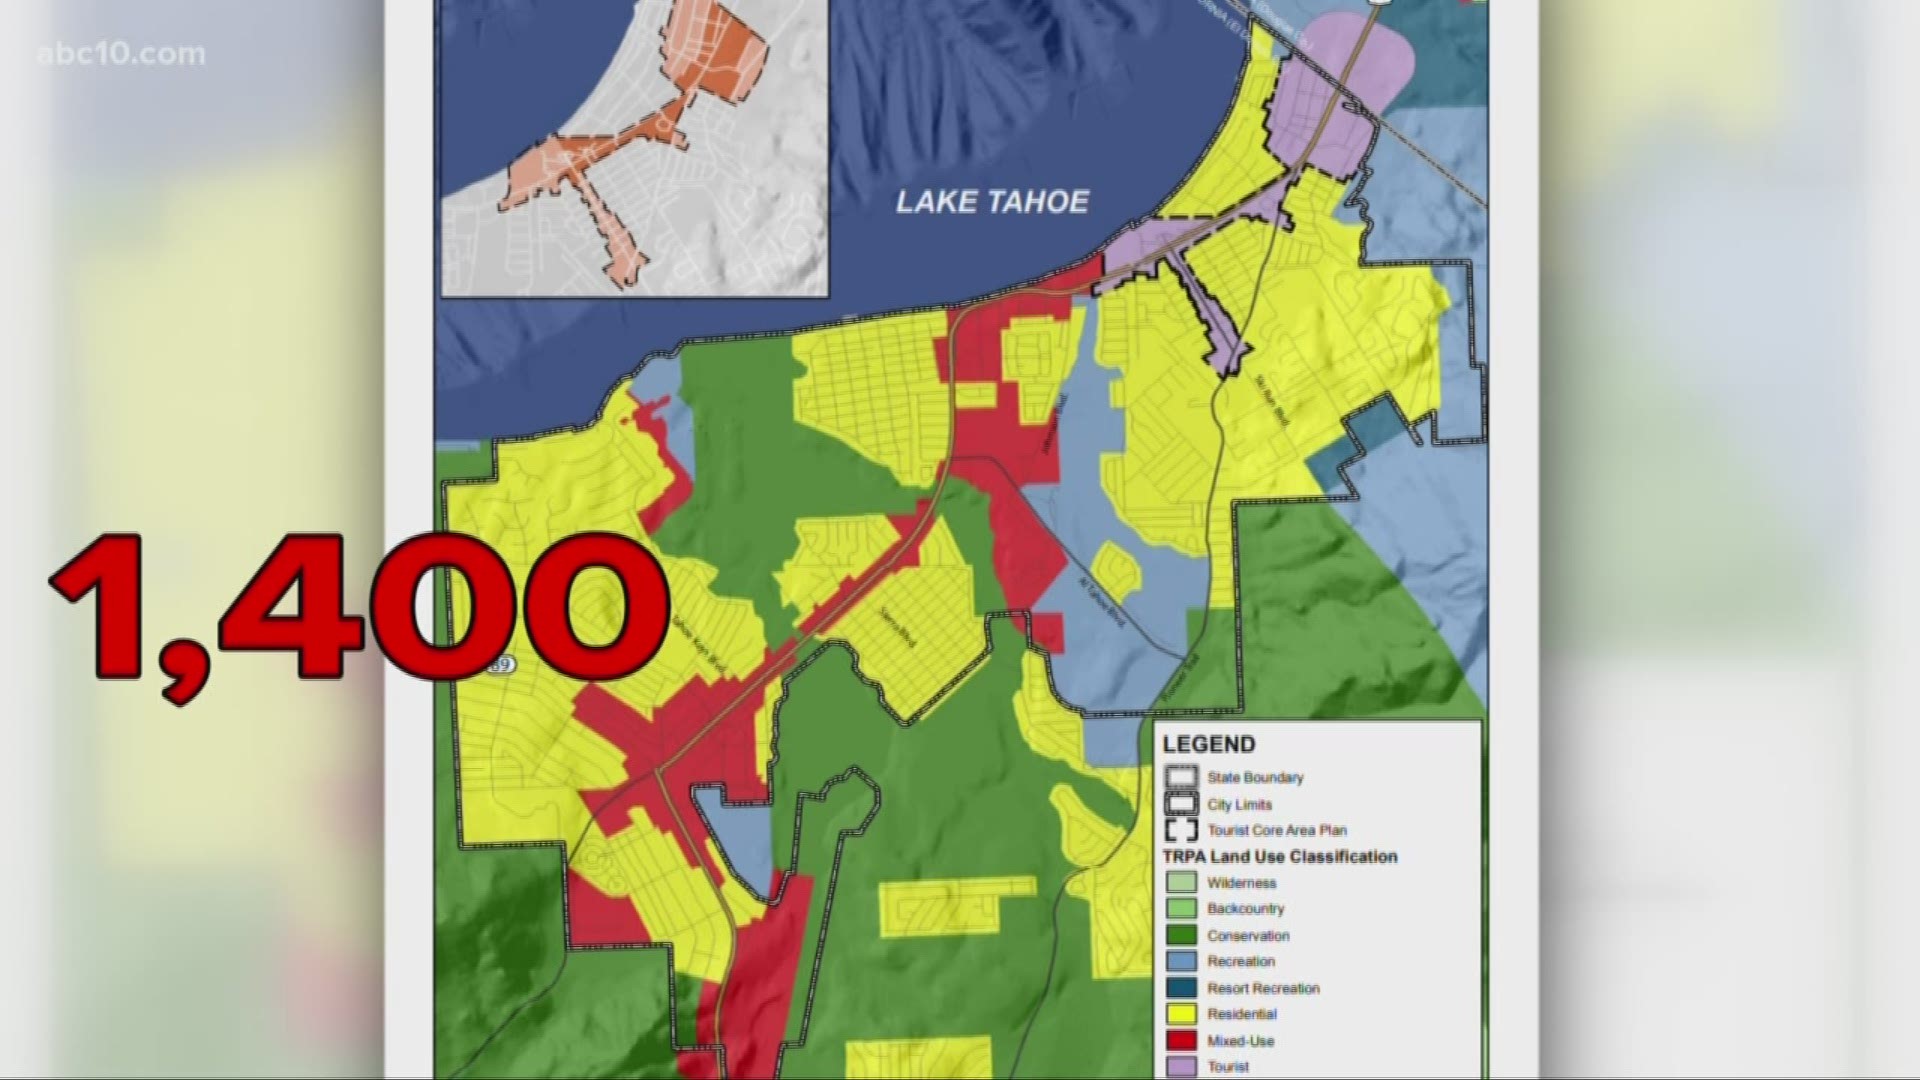 south lake tahoe tourist core map South Lake Tahoe Bans Vacation Rentals What You Need To Know south lake tahoe tourist core map